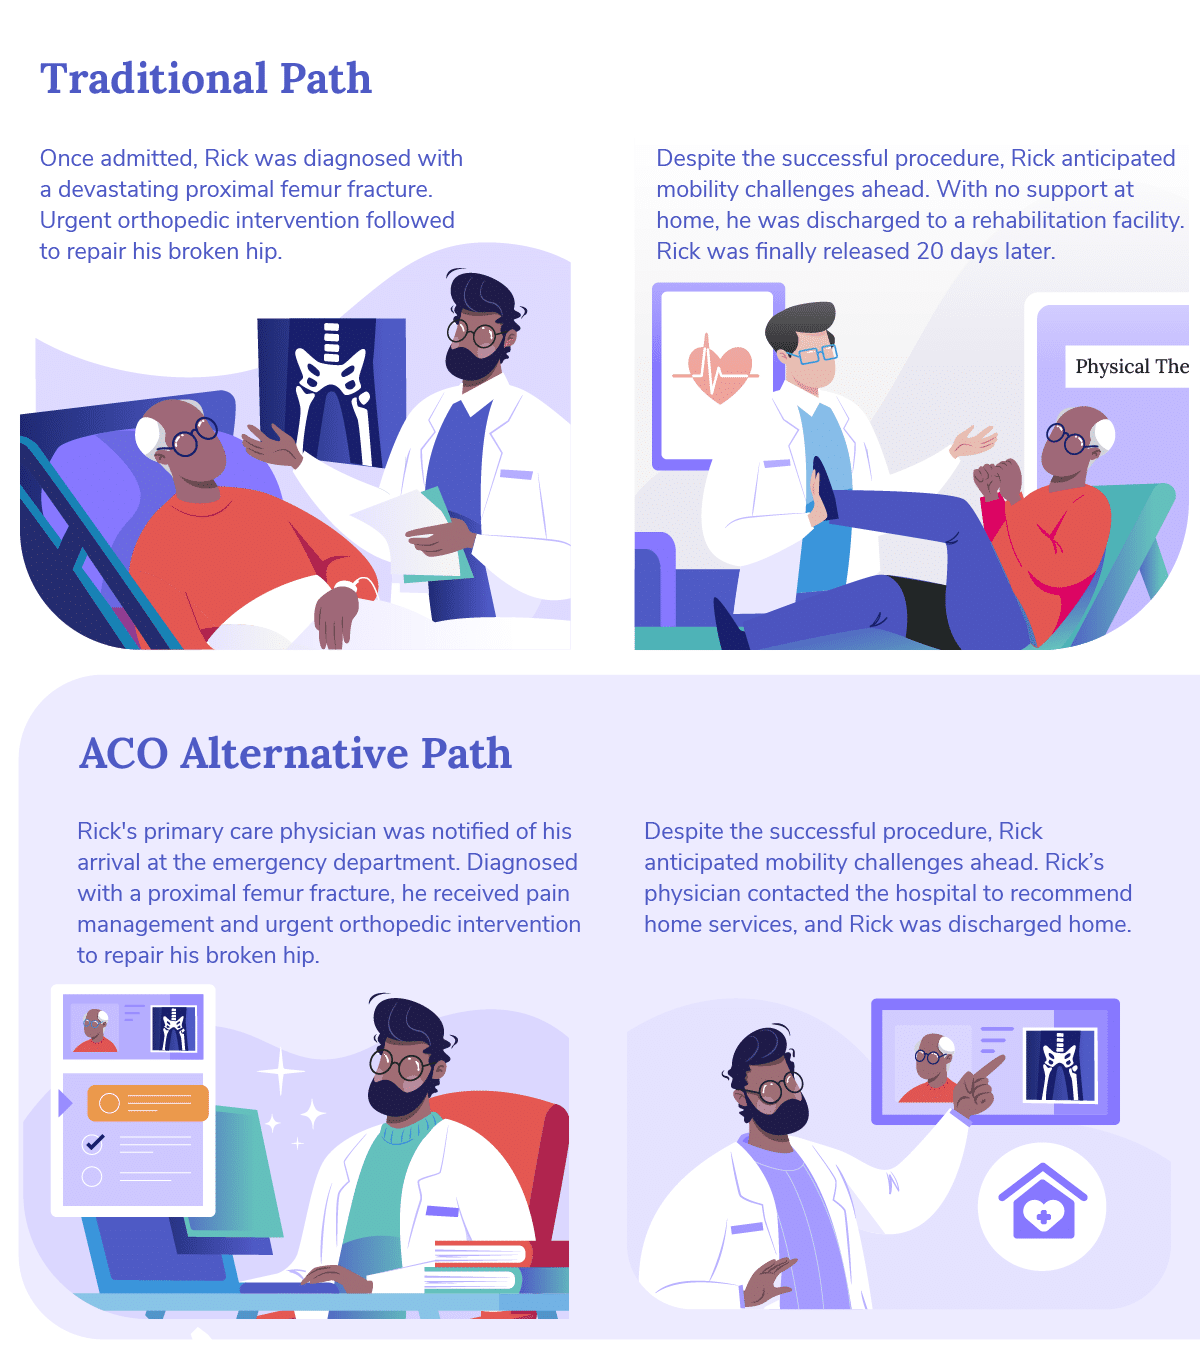 future-of-healthcare_patient-experience-traditional-vs-aco-02